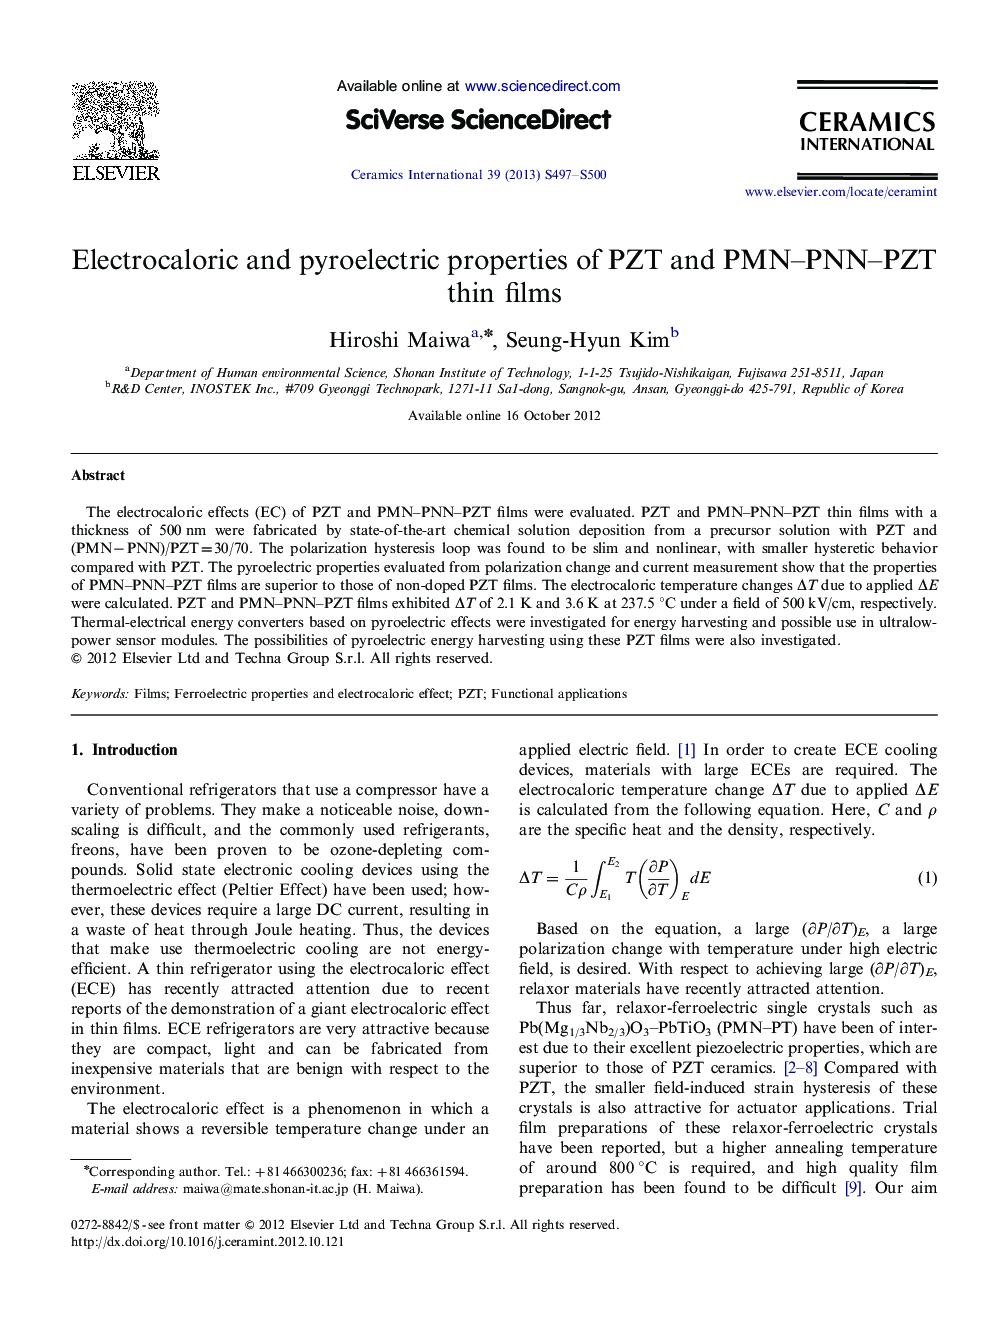 Electrocaloric and pyroelectric properties of PZT and PMN–PNN–PZT thin films